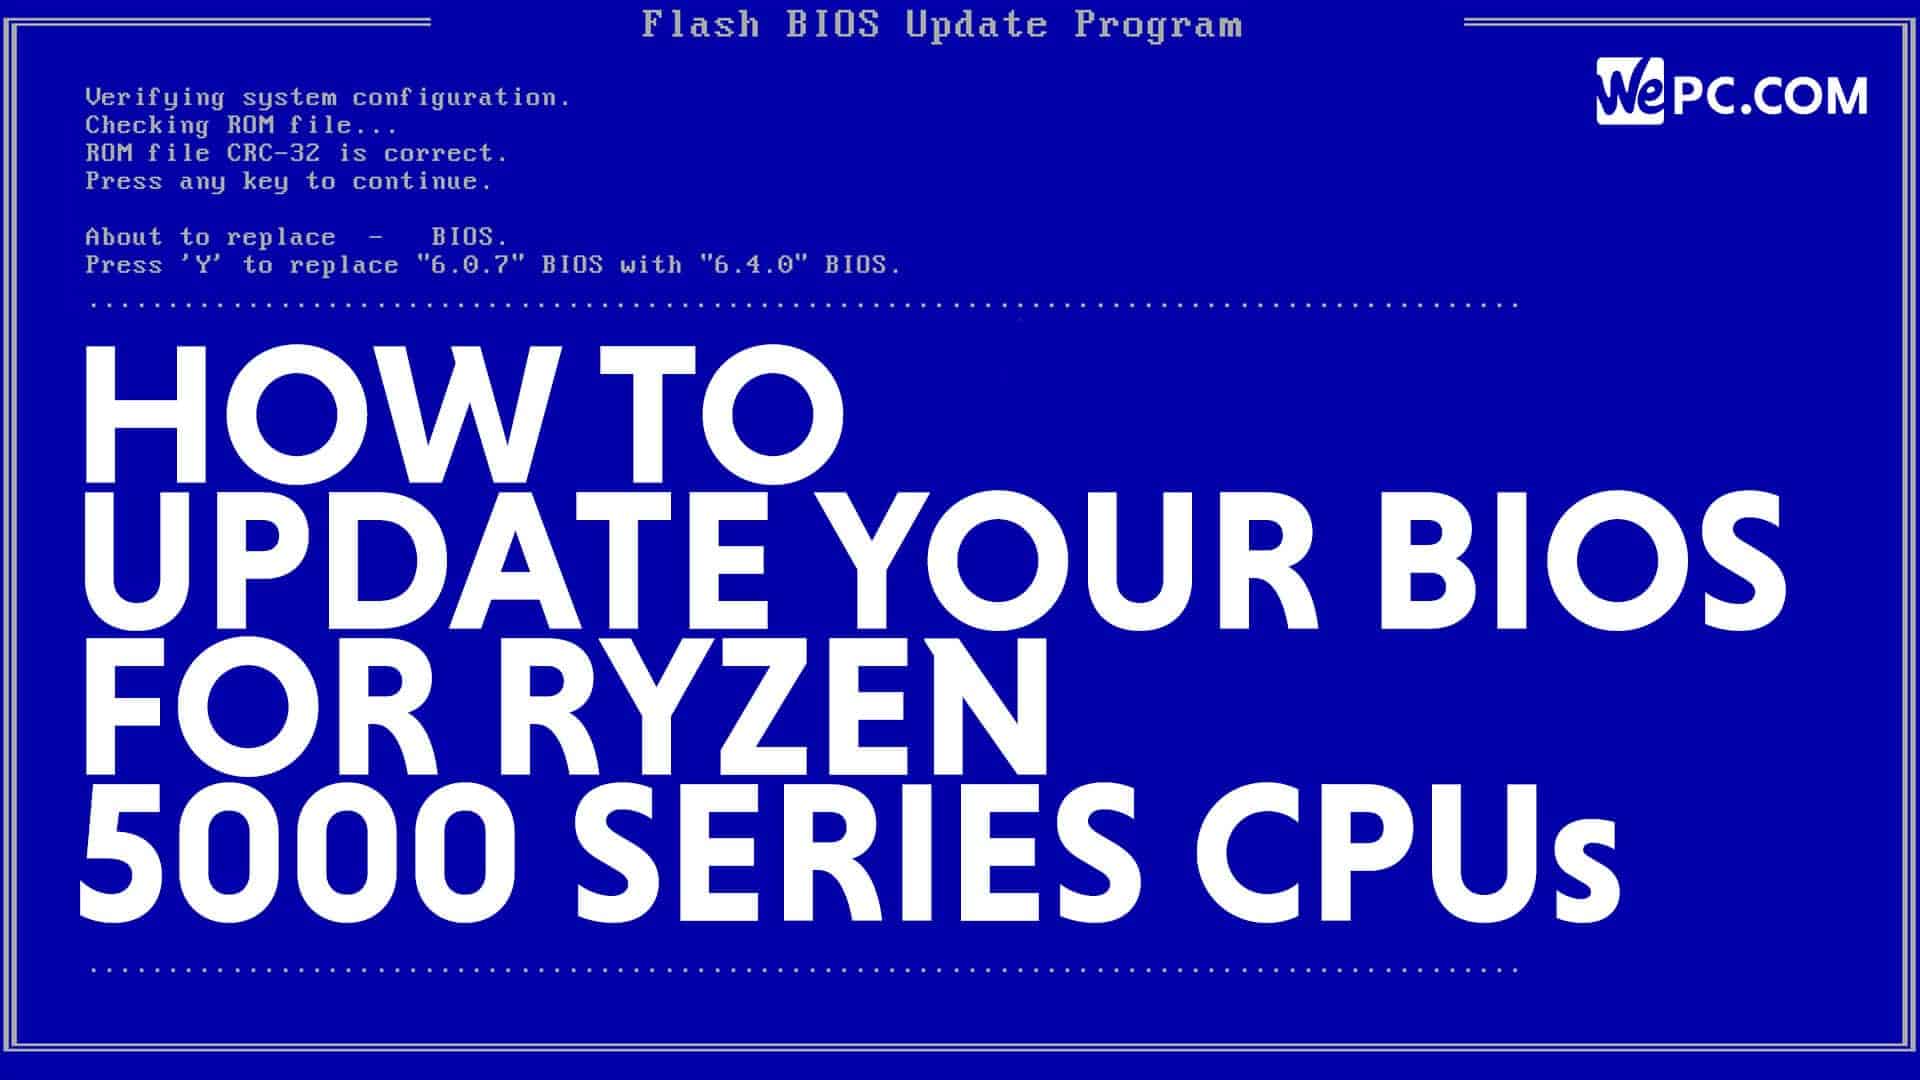 How To Update Your BIOS For Ryzen 5000 Series CPUs | WePC